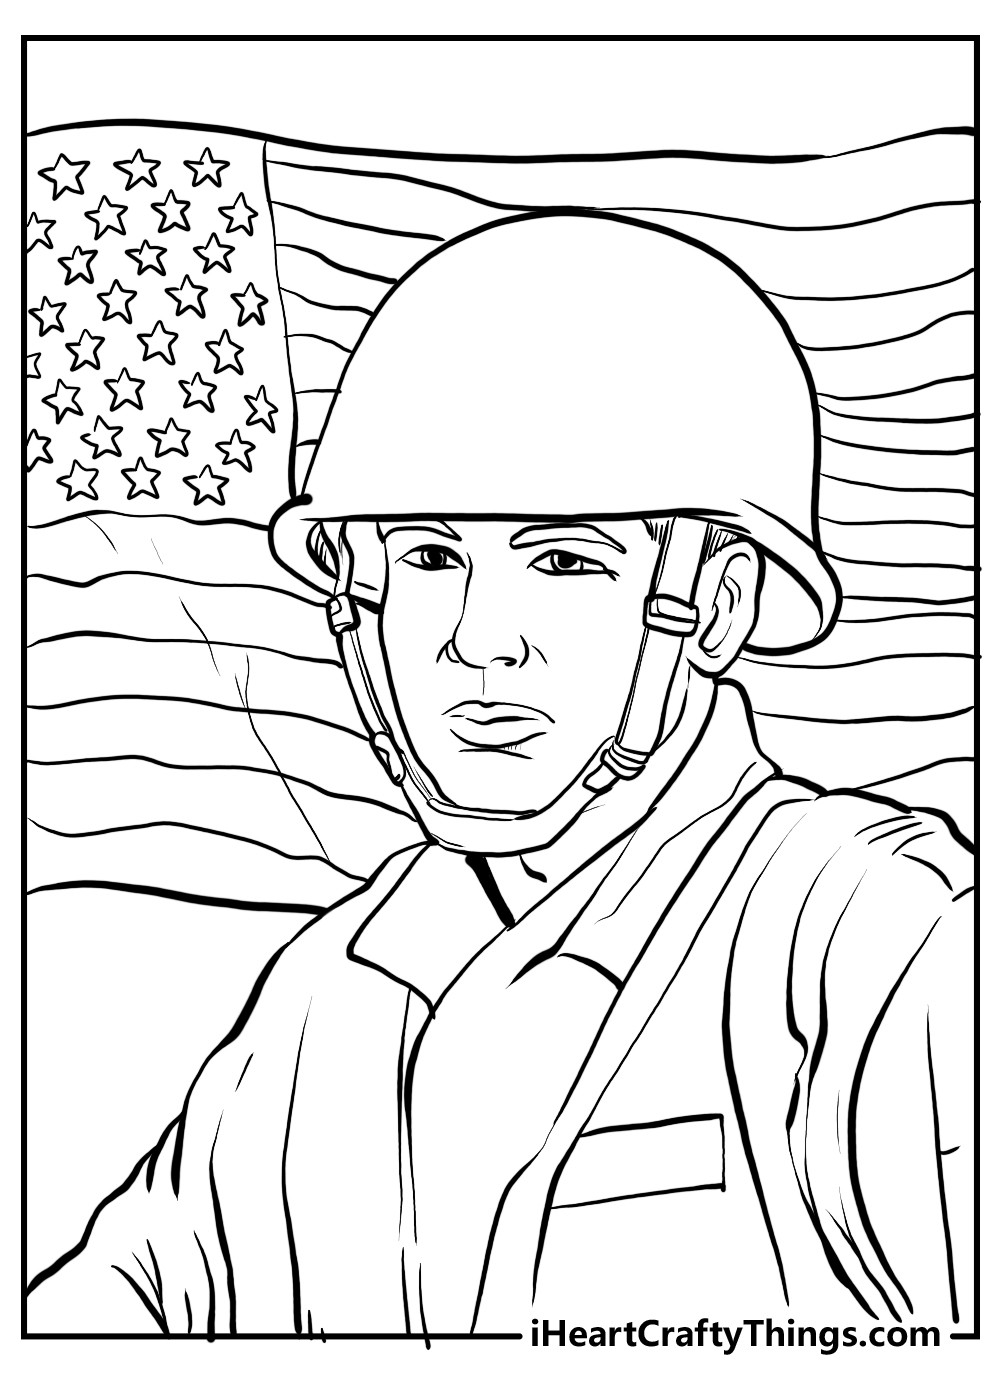 the veteran's day coloring pages